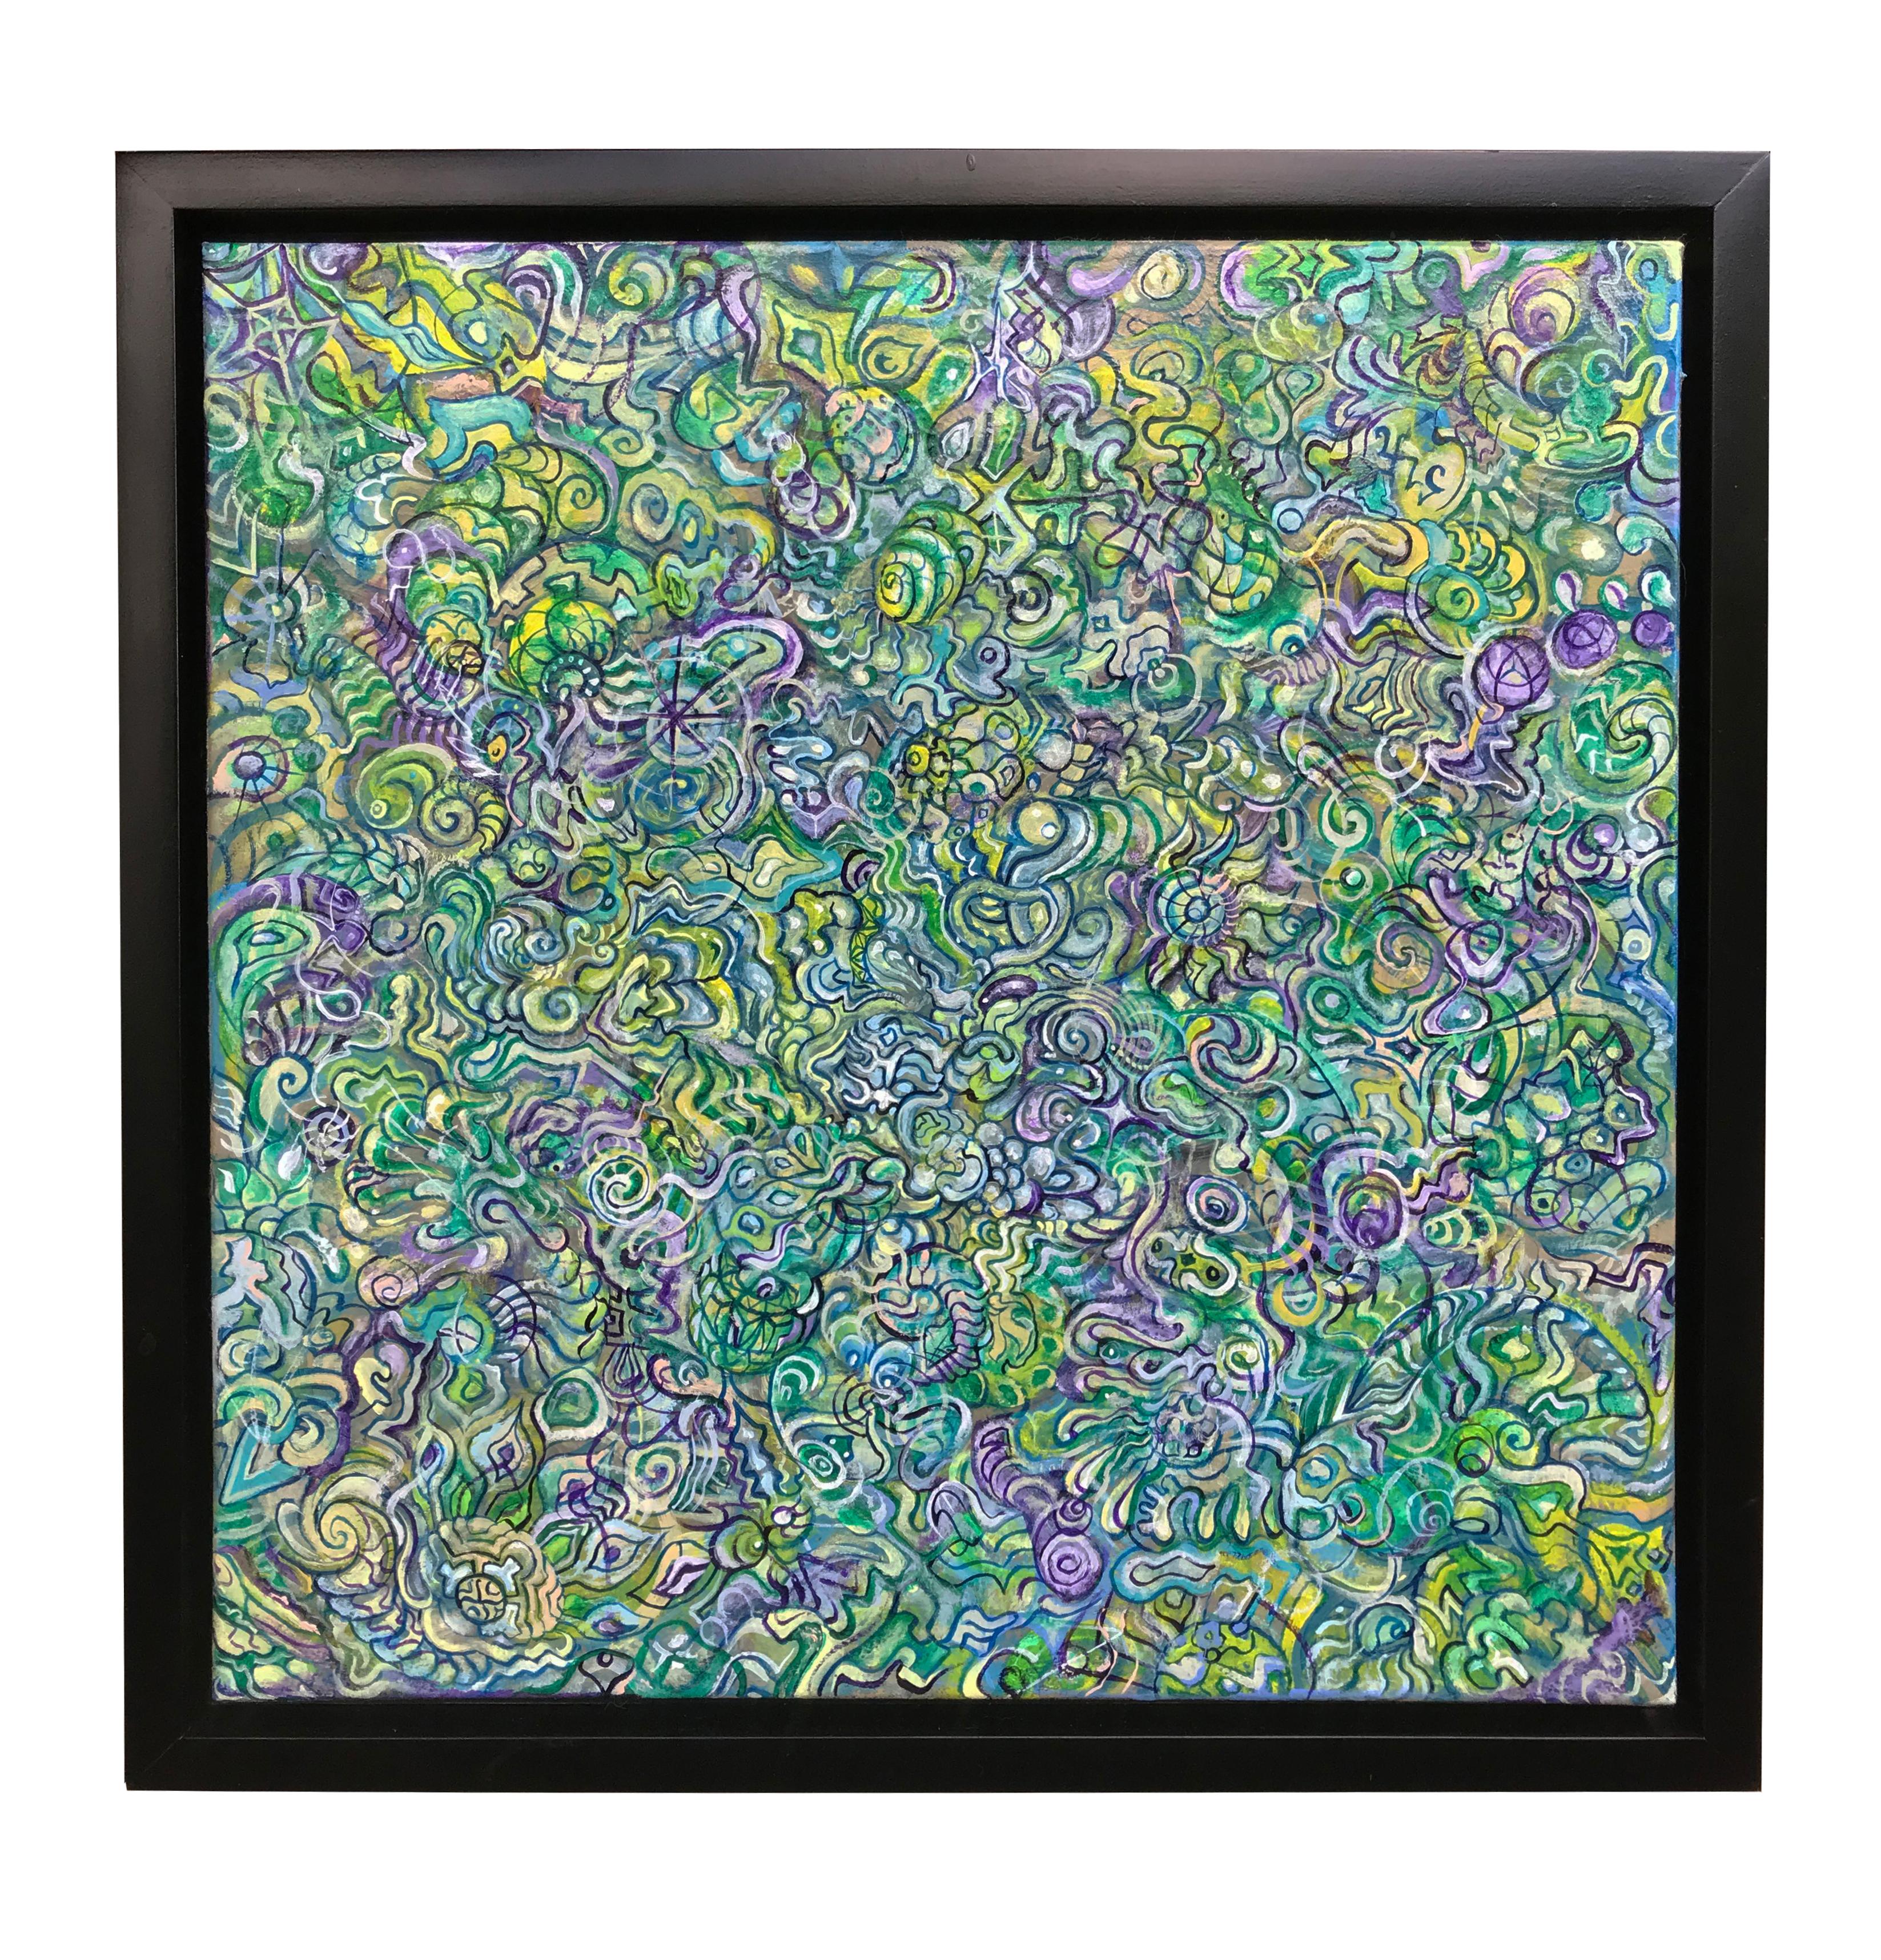 Ethan Meyer Abstract Painting - "Coincidentia Oppositorum", Abstract Acrylic Painting on Canvas, Framed